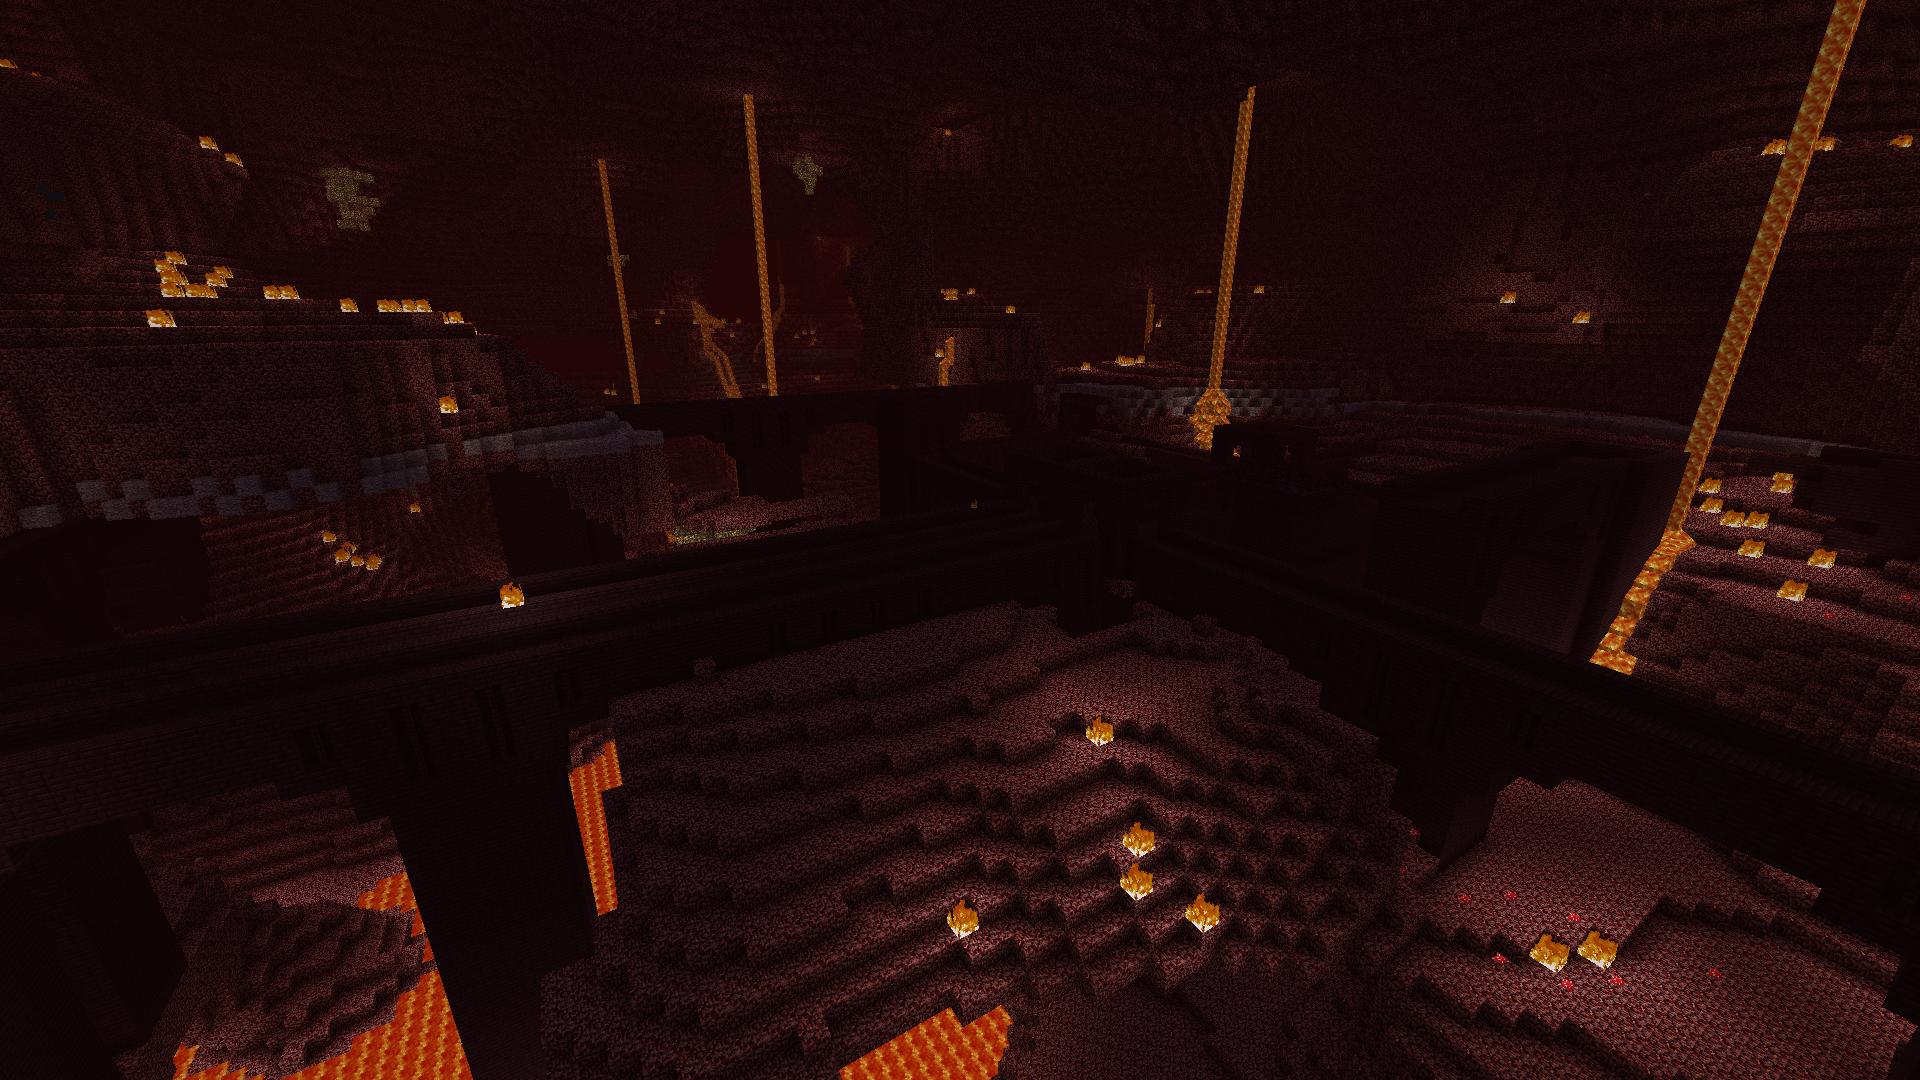 Nether Structures Revealed For Minecraft Beta 1.9